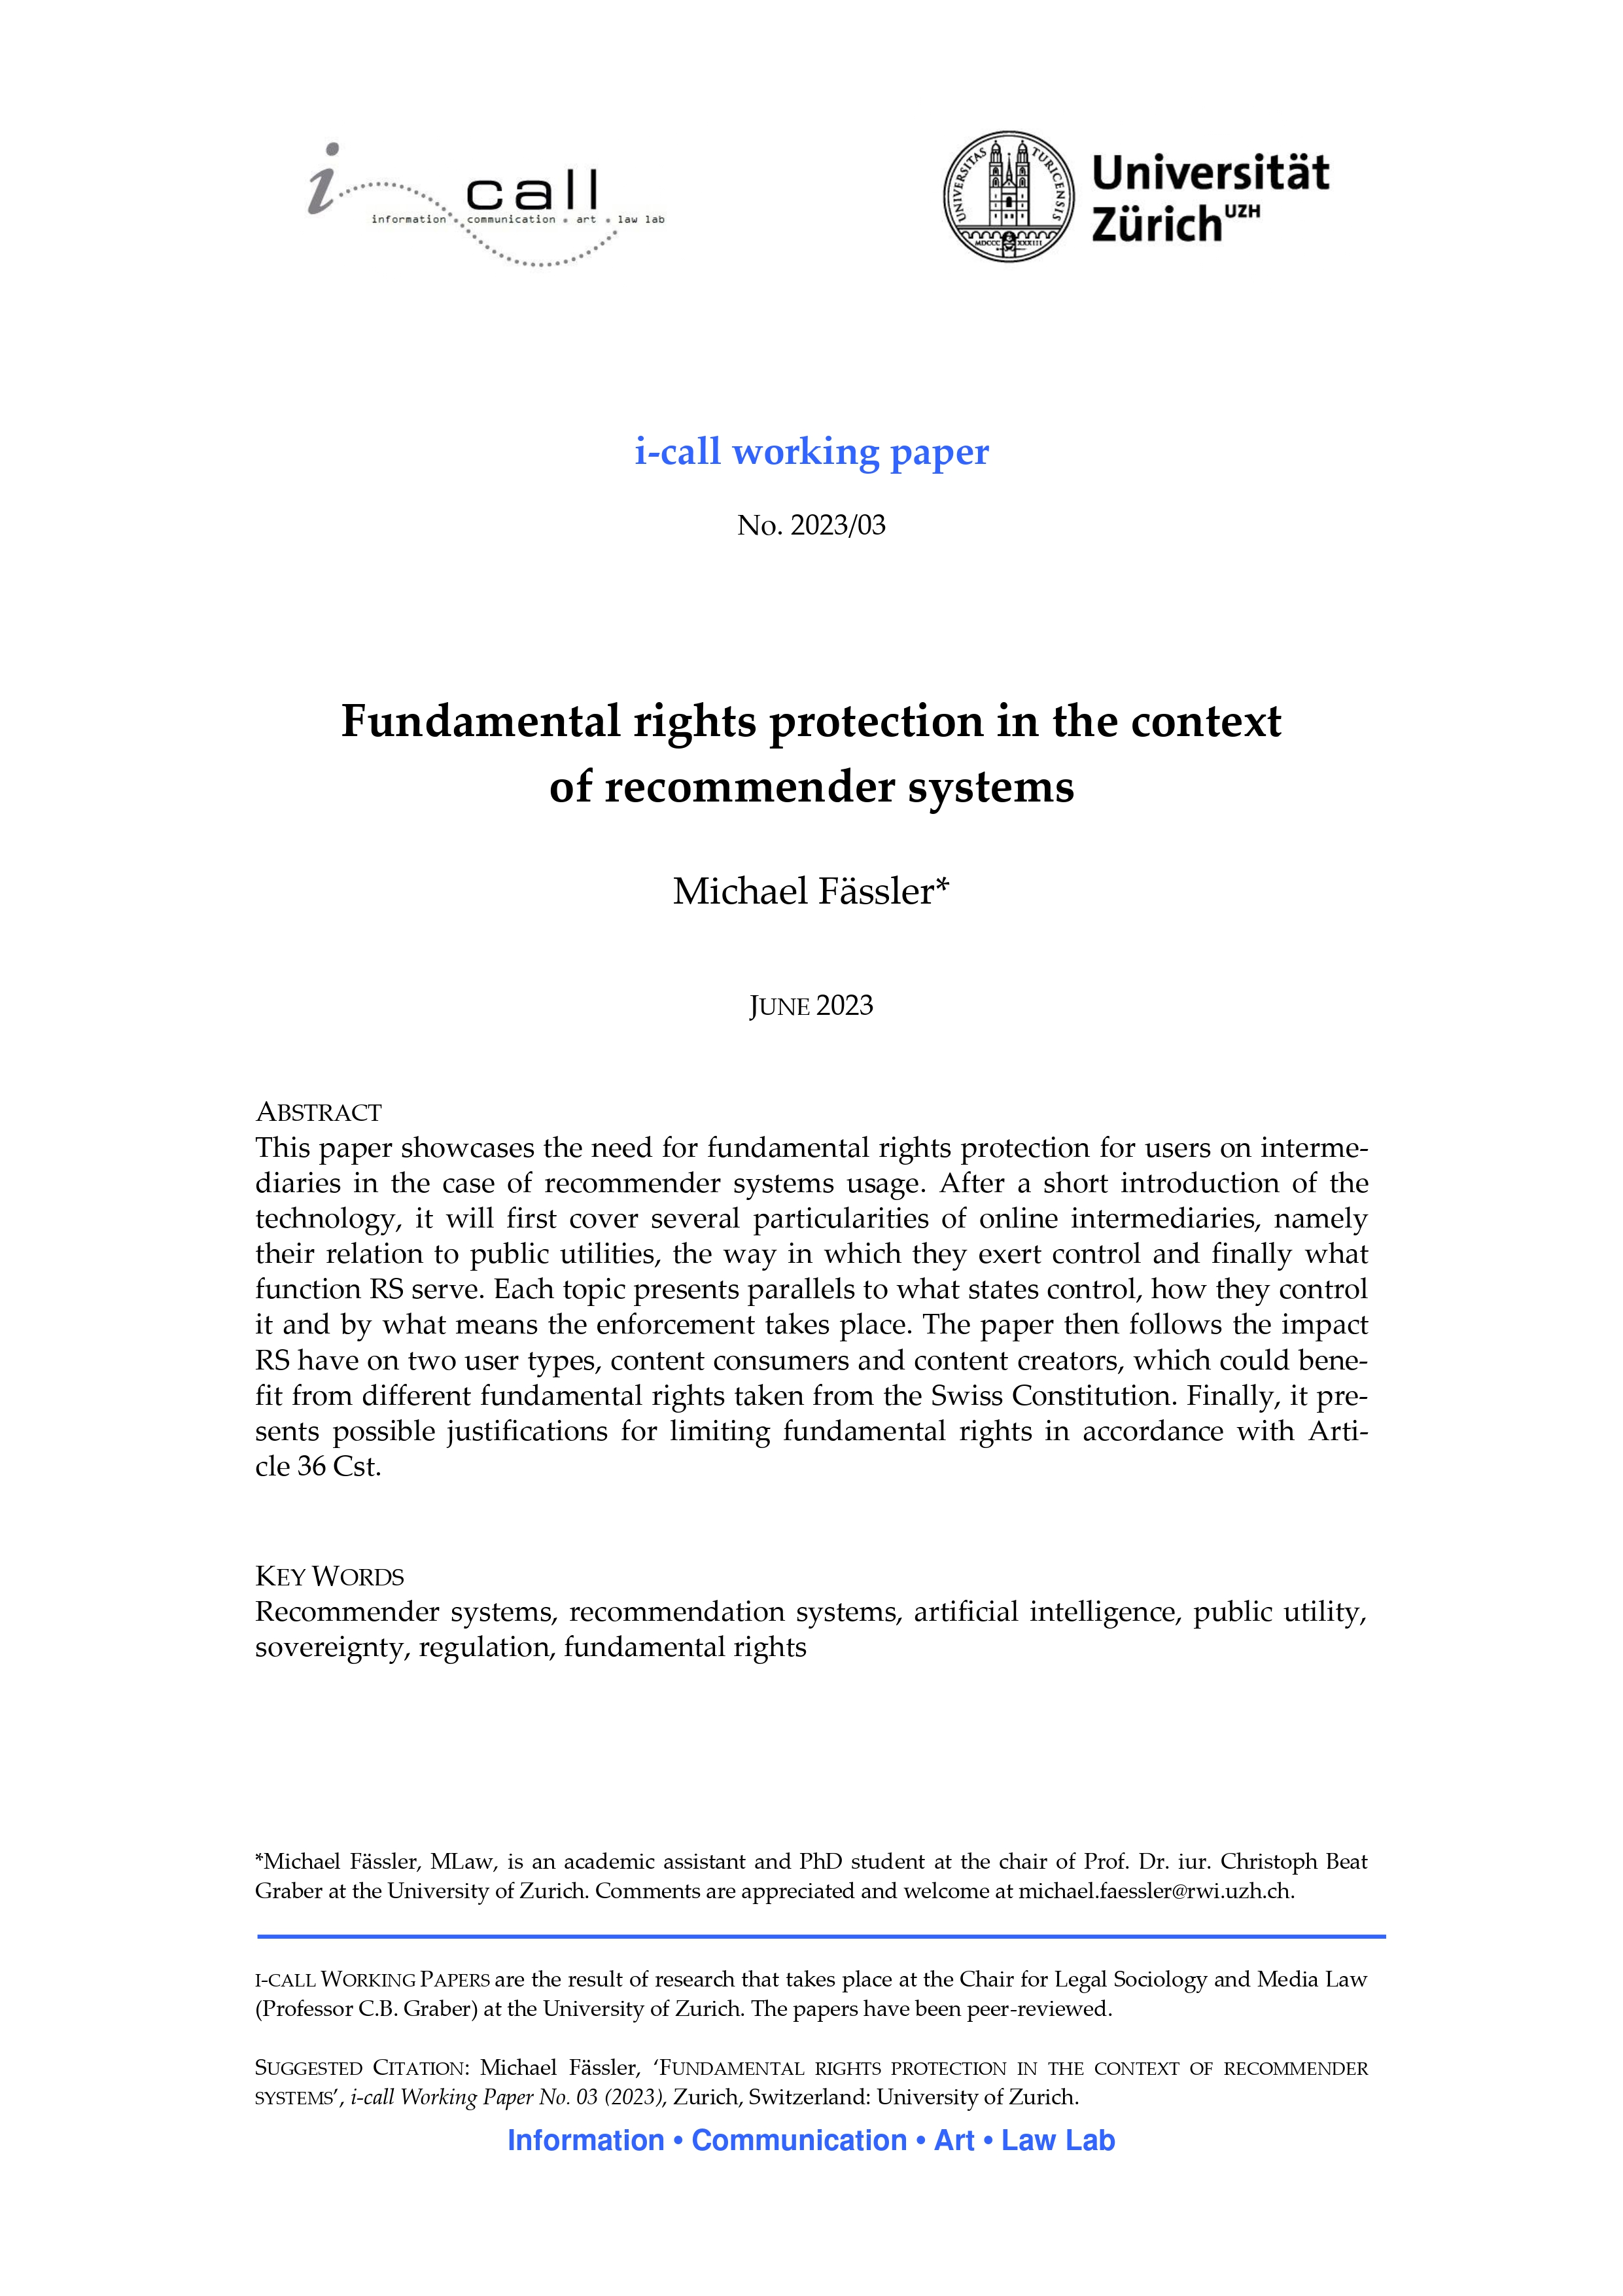 Michael Fässler_Fundamental rights protection in the context of recommender systems_2023_03